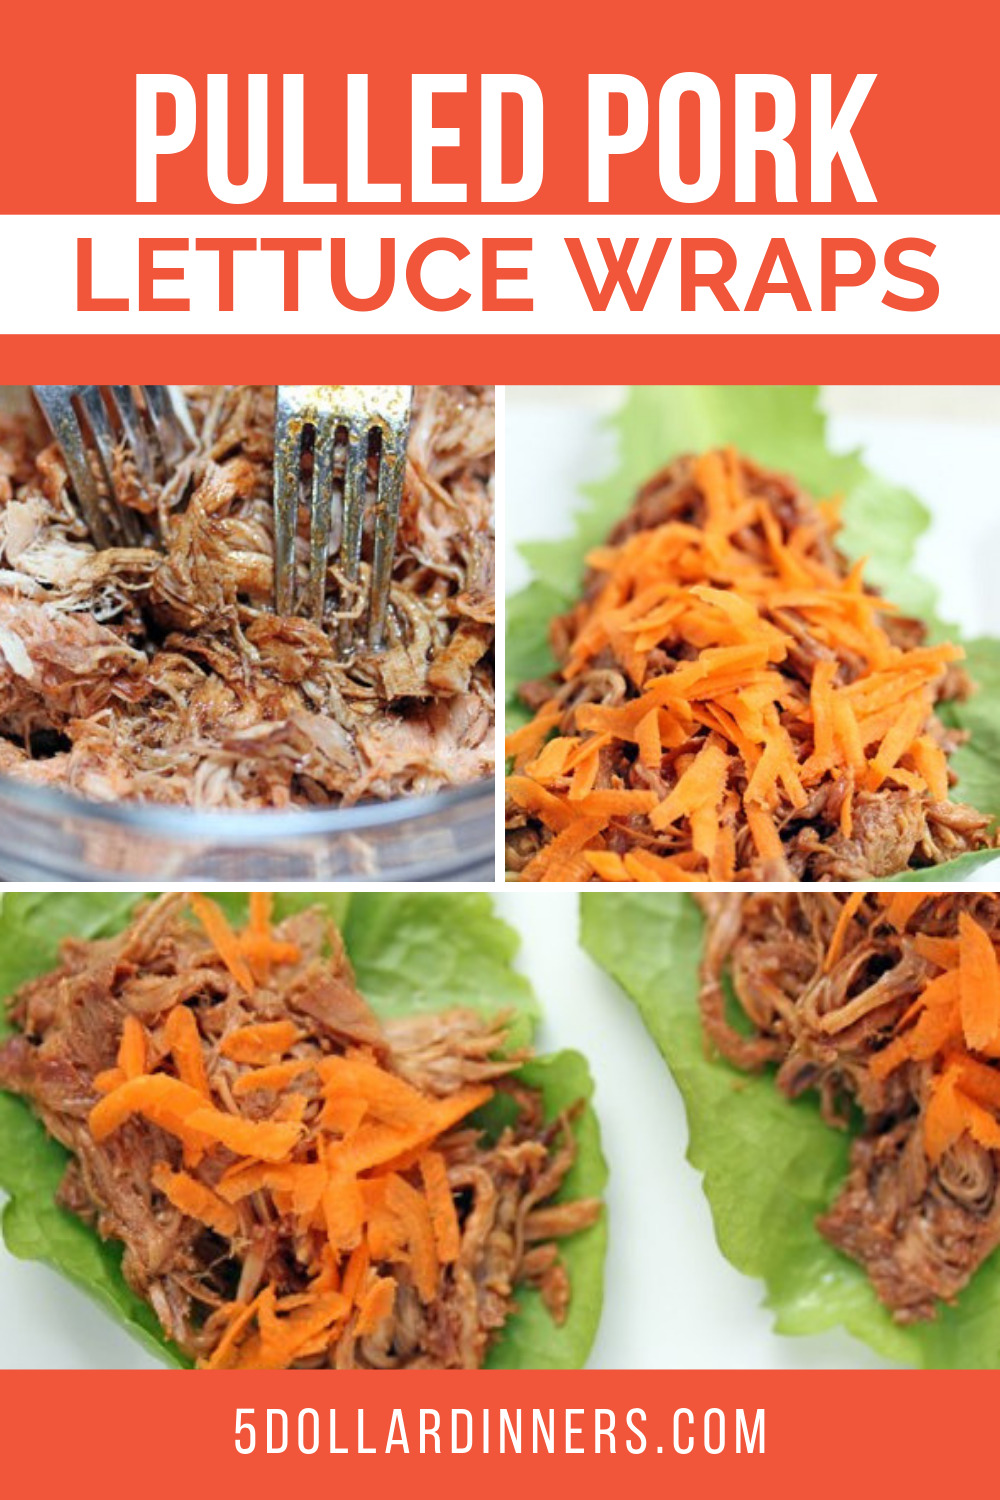 Pulled Pork in Lettuce Wraps - Fresh, delicious, summer meal idea!